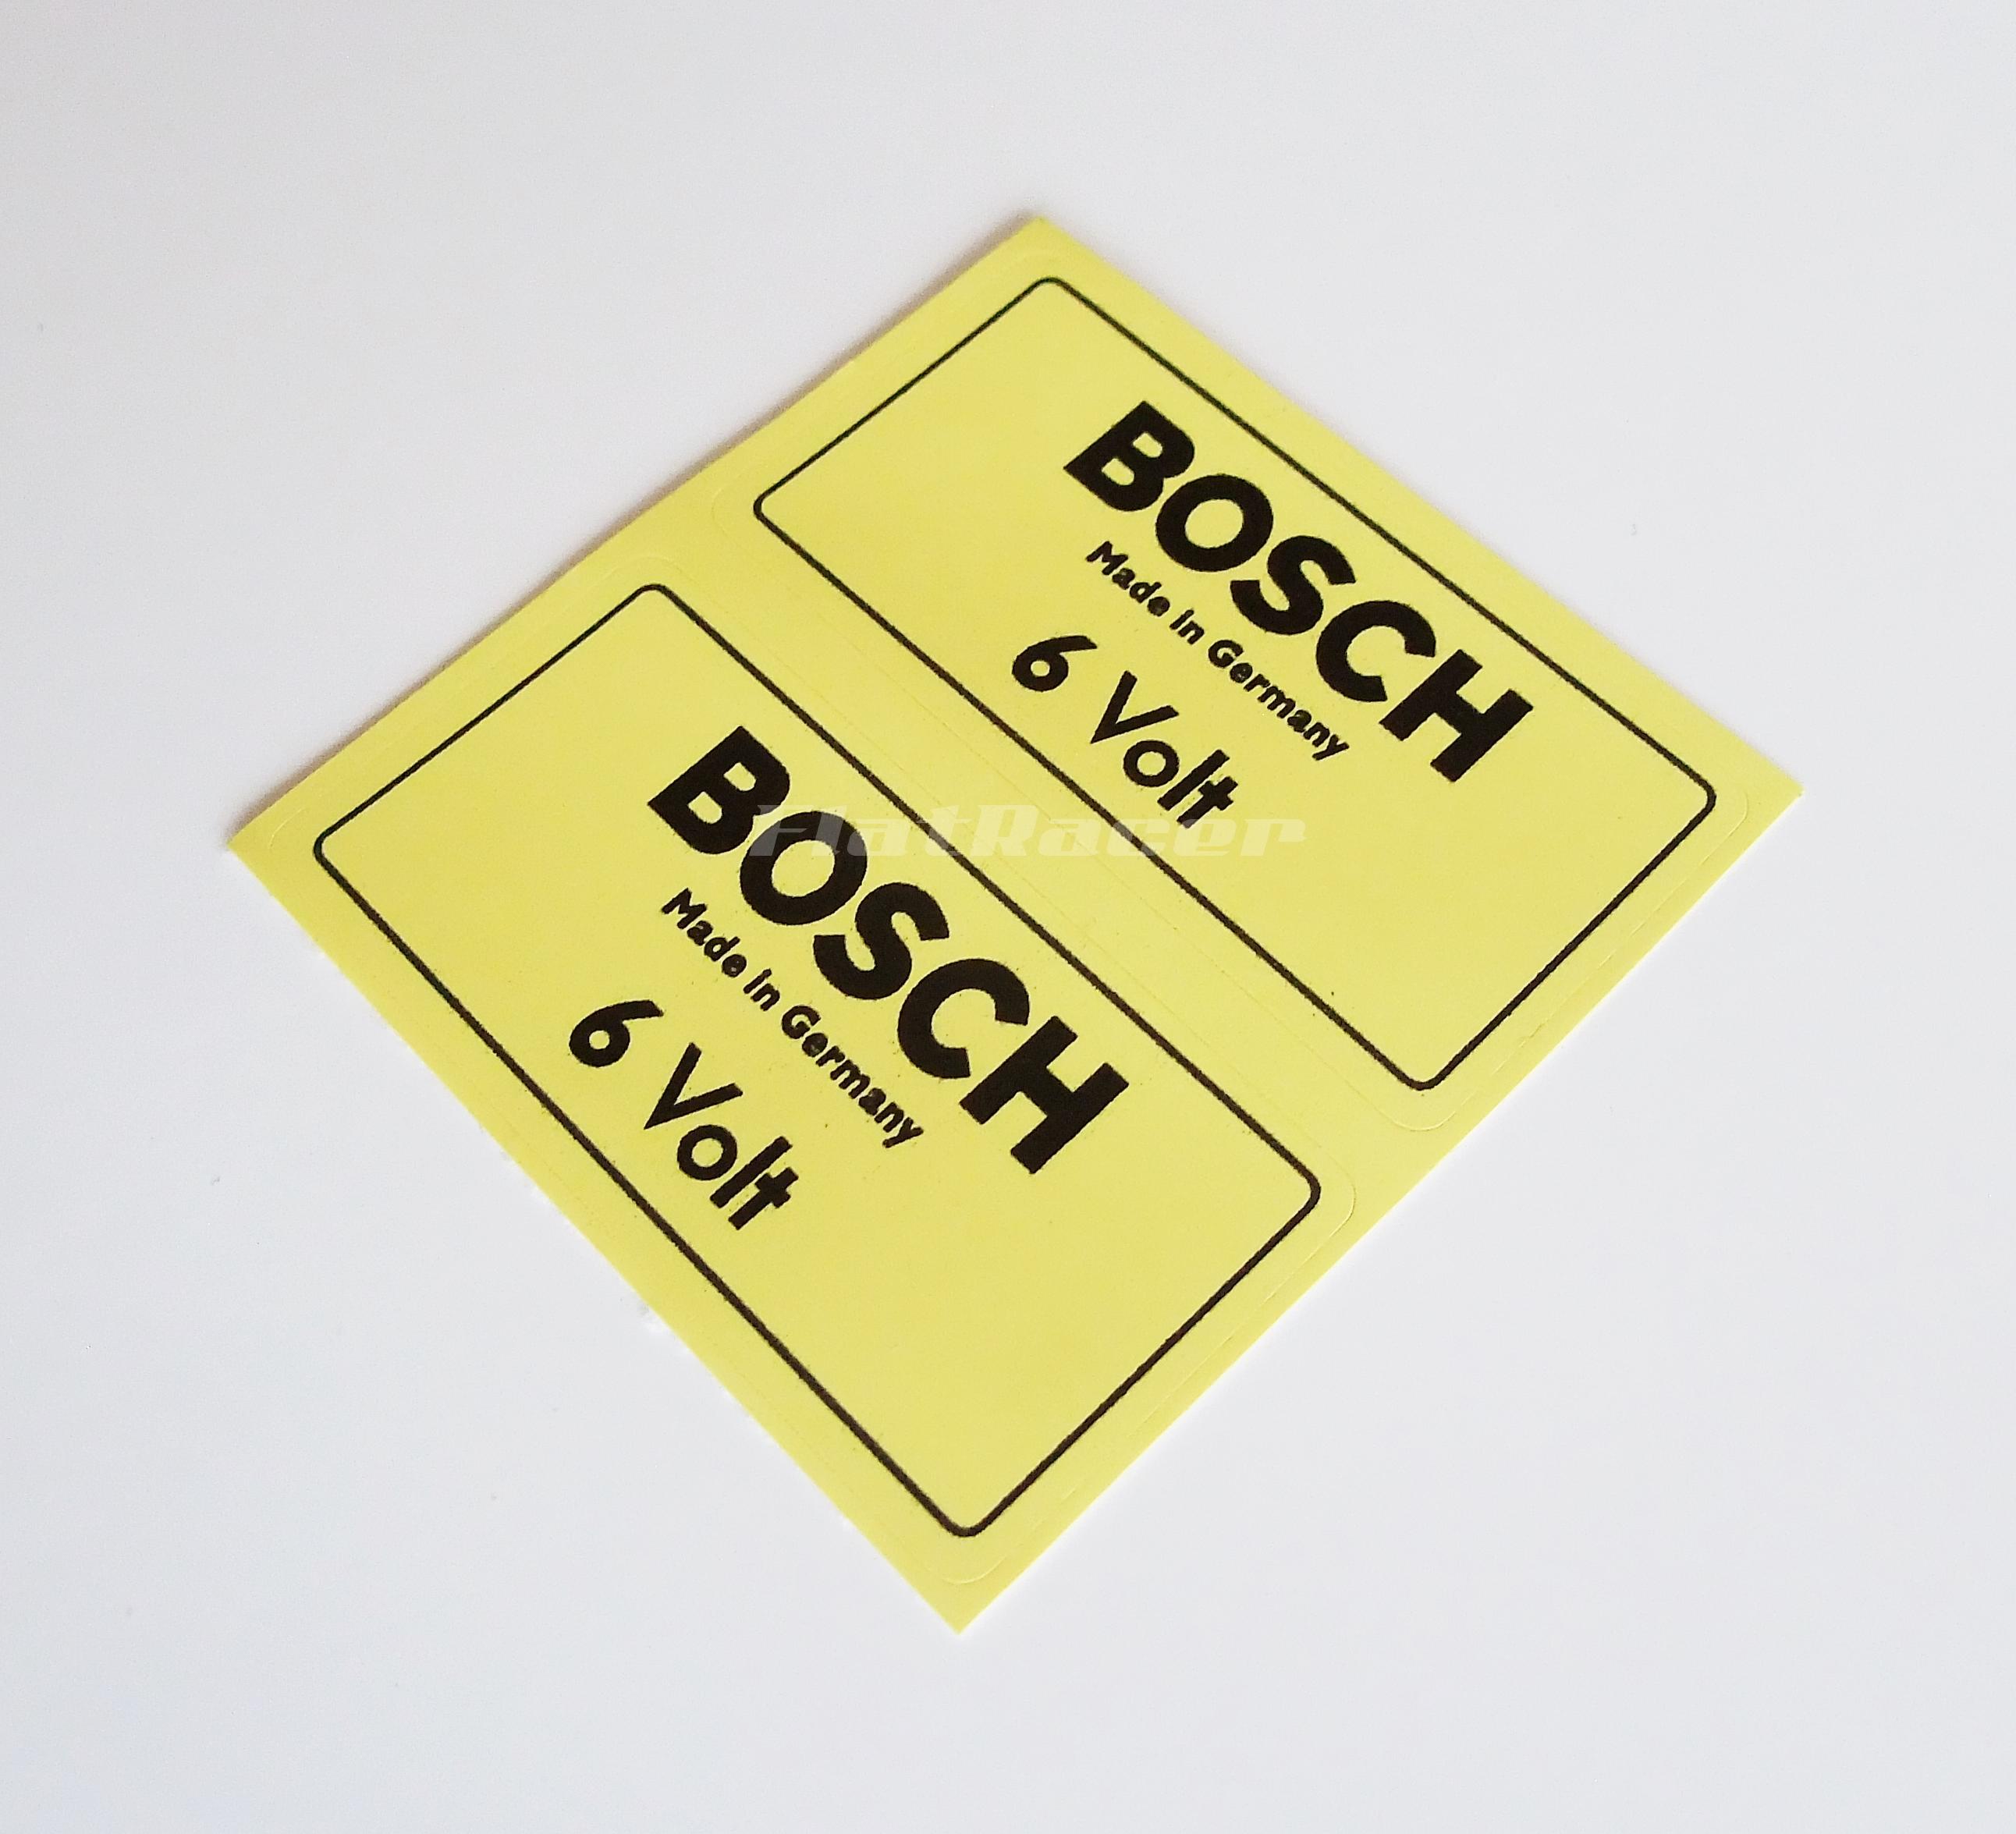 BMW Bosch 6v ignition coil yellow stickers (pair)